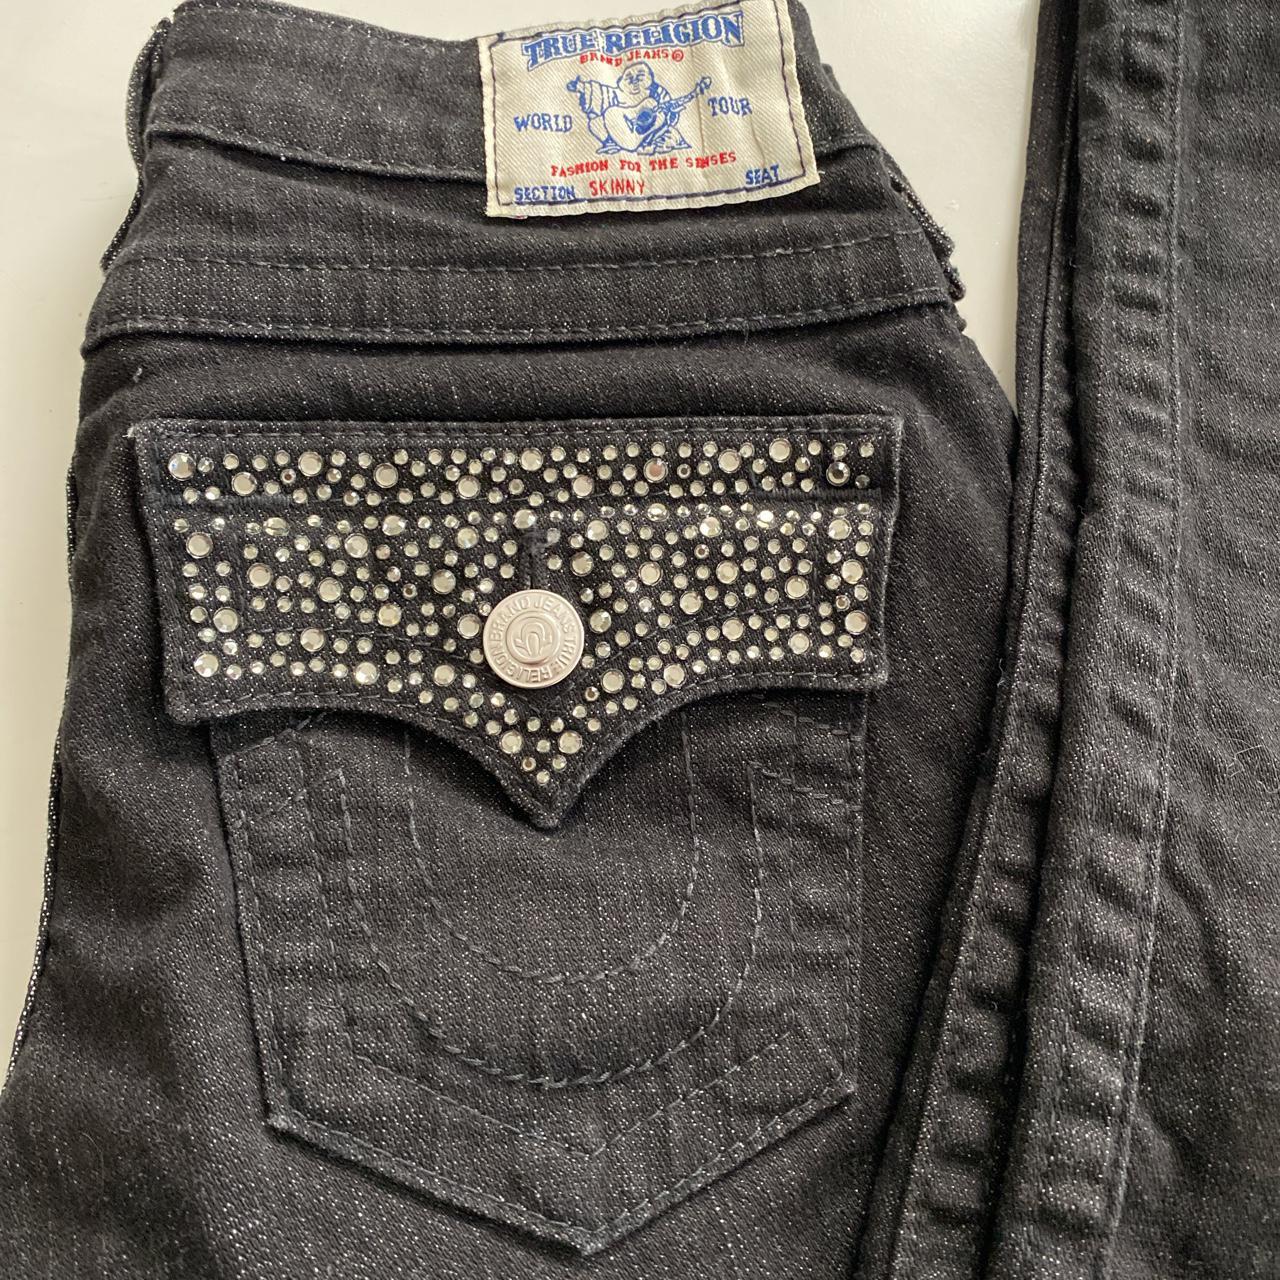 Black skinny jeans with silver chain Size 5 never - Depop